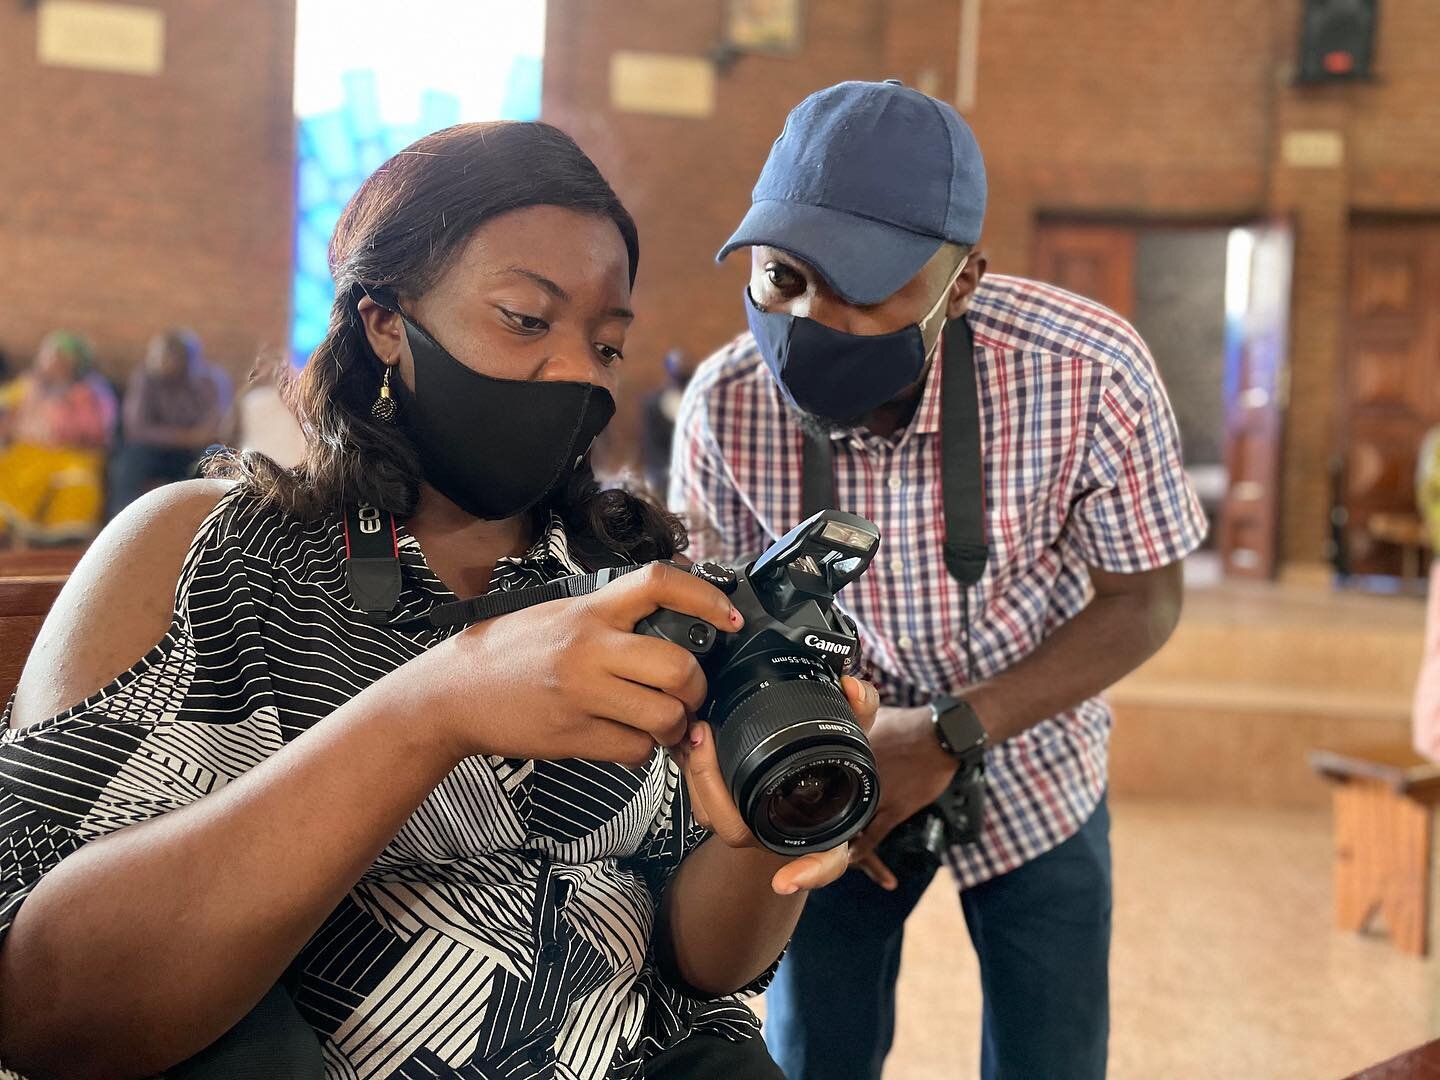 Experiential learning provides hands-on training that prepares students for their careers after they leave our programming. Teacher @michel.lunanga worked with students at a local wedding in #goma this weekend near our lab. Practicing safety #COVID19